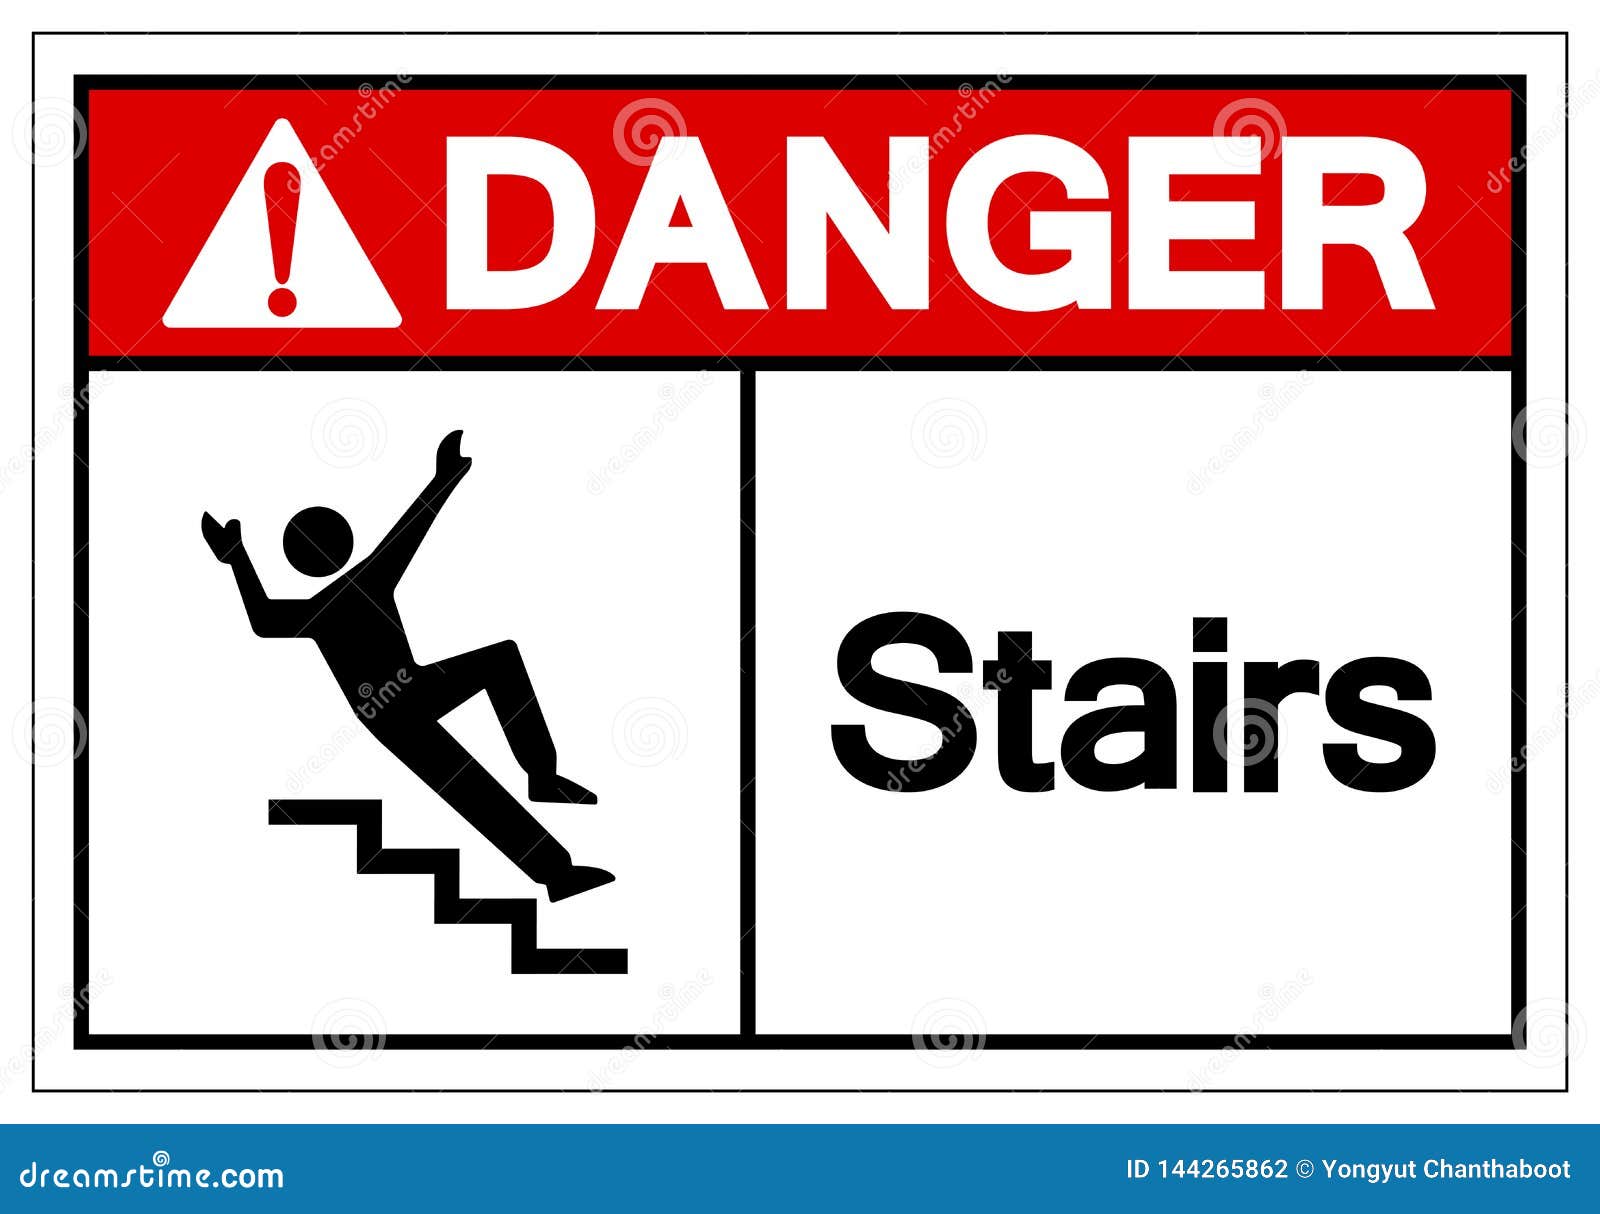 The Dangers of Stairs